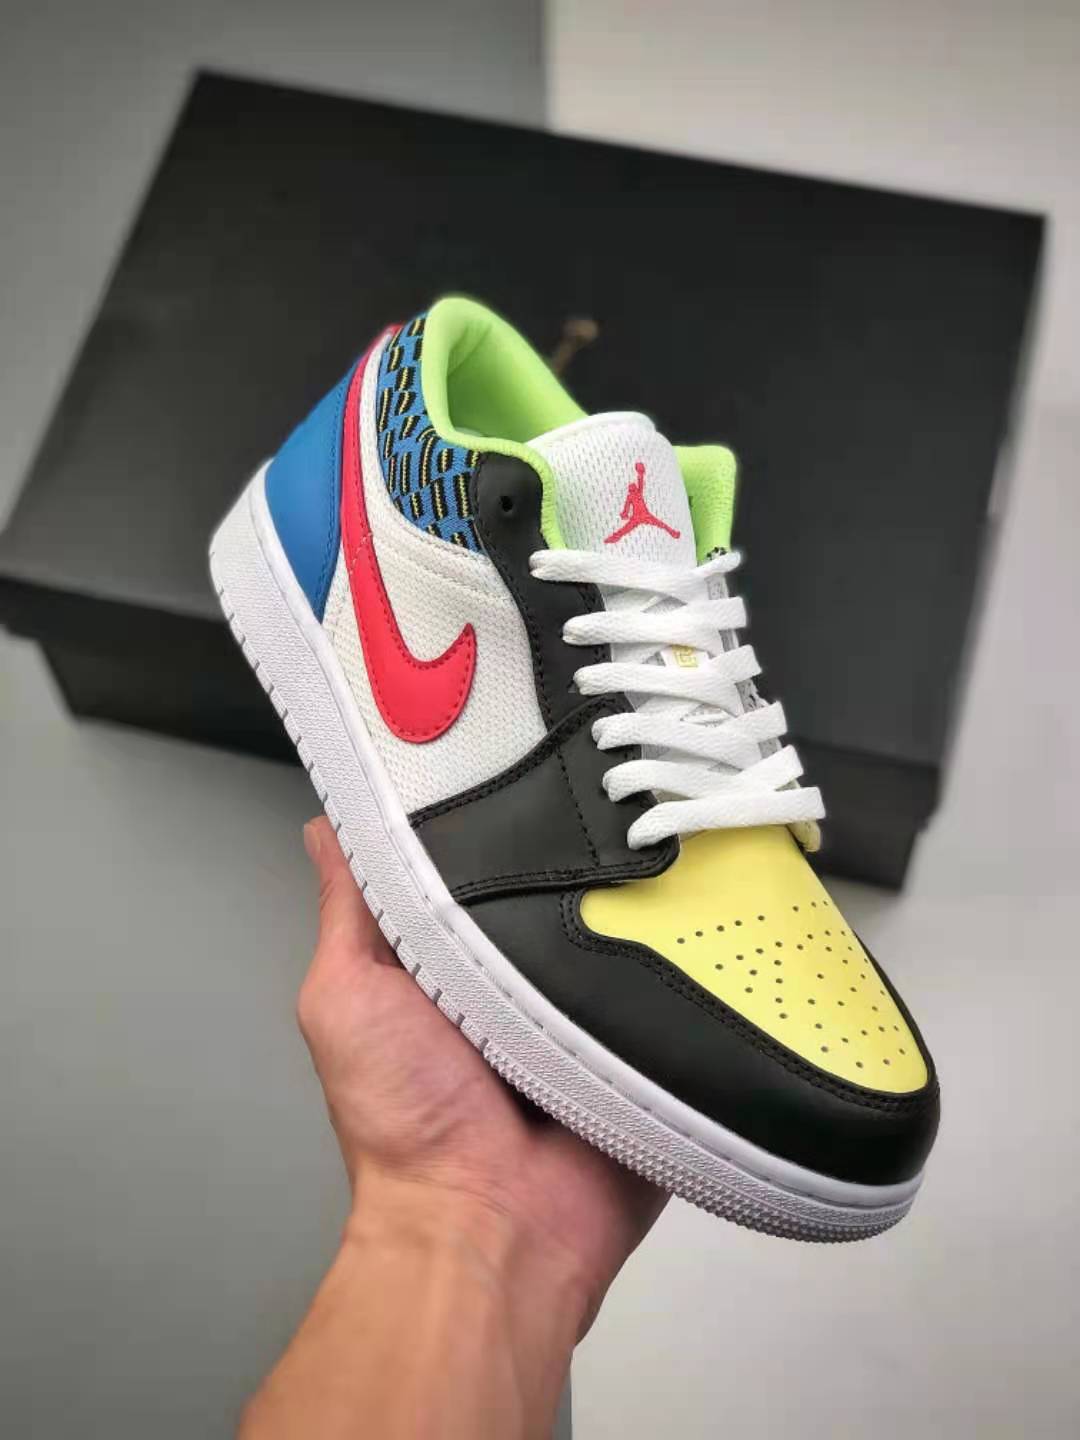 Air Jordan 1 Low 'Funky Patterns' DH5927-006 | Stylish and Unique Sneakers